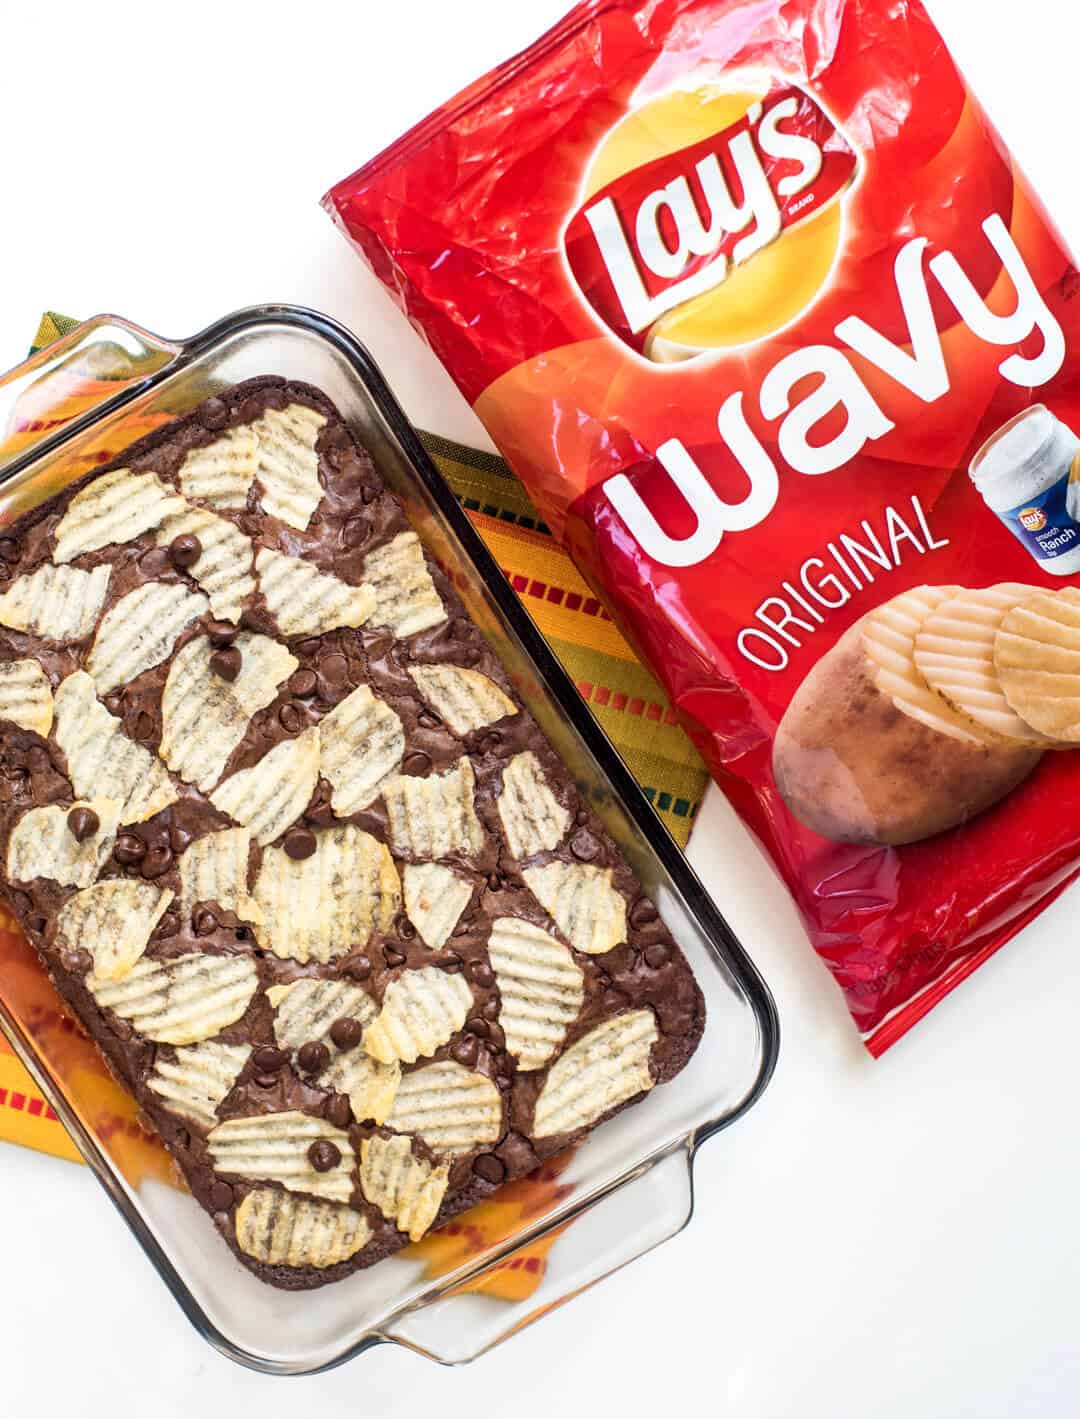 A bag of Wavy Lay's Potato Chips next to a dish of Potato Chip Brownies.